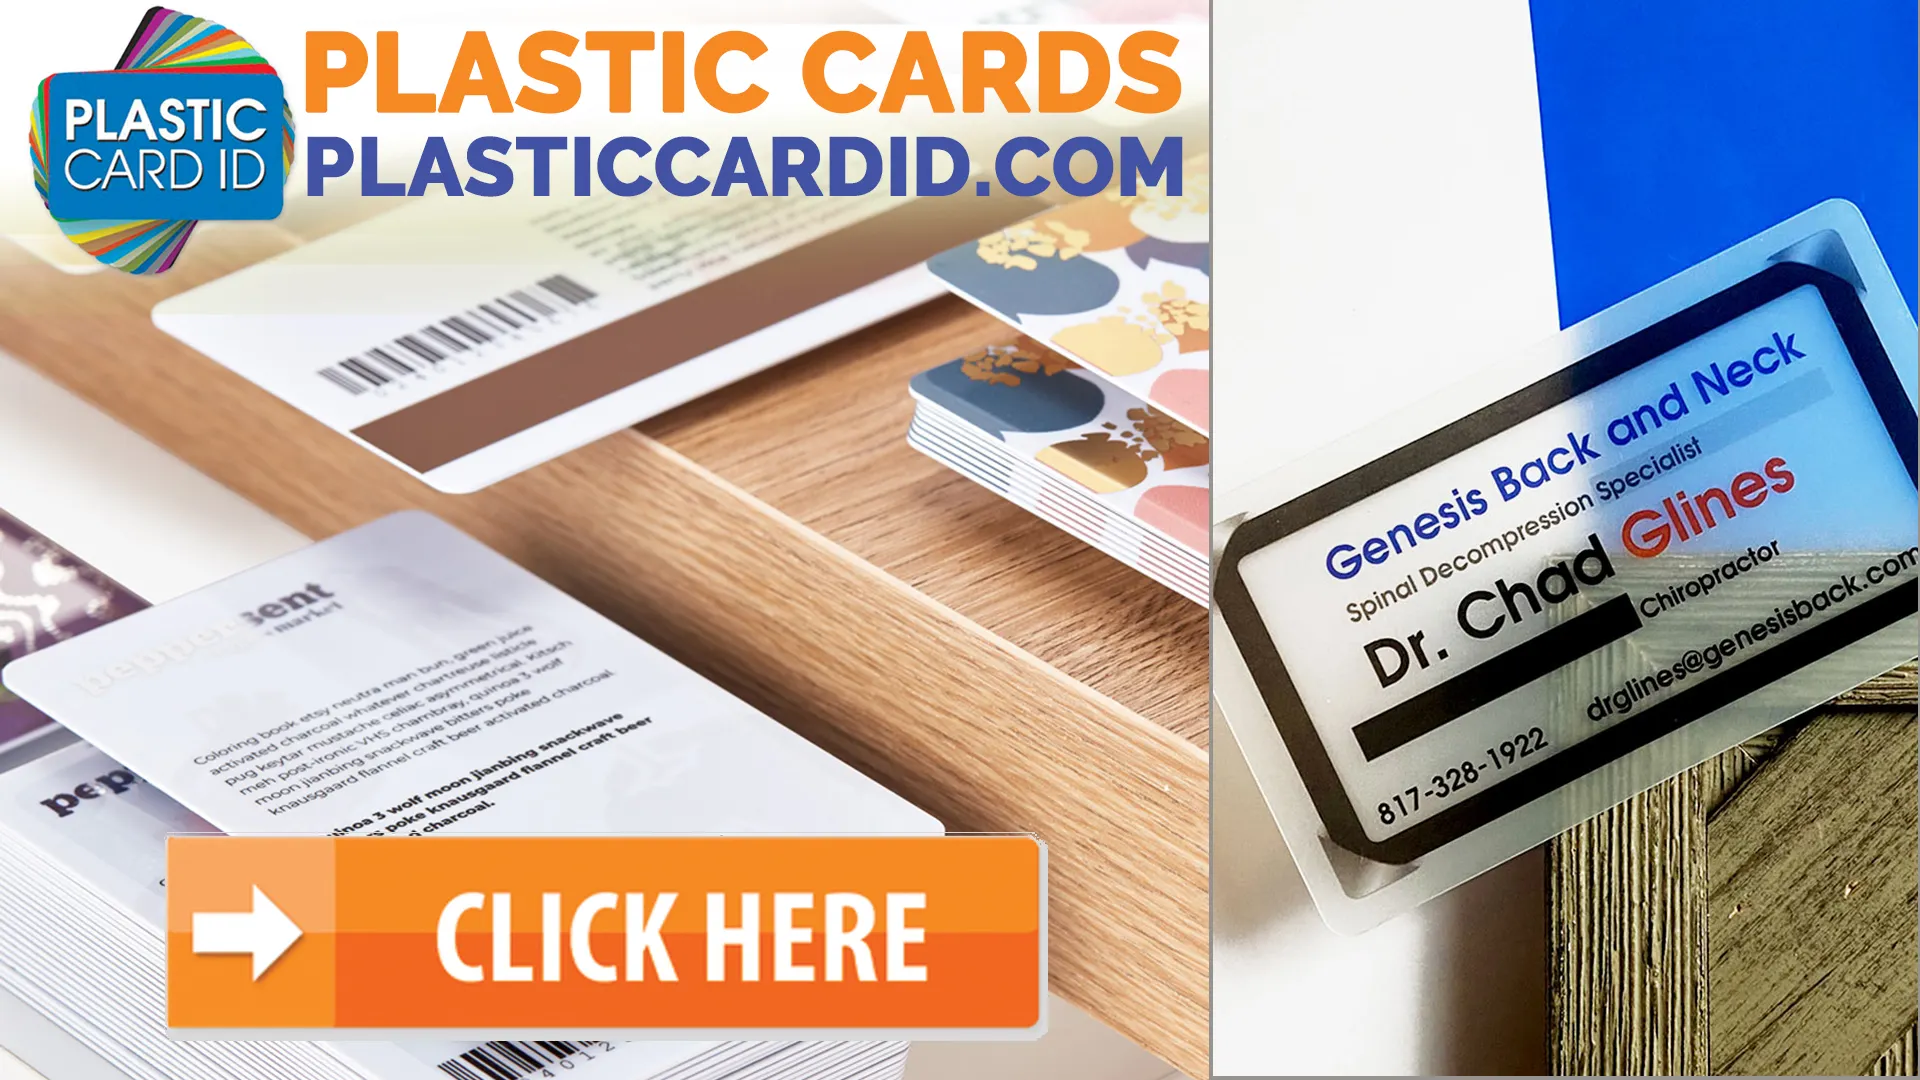 Welcome to the World of Controlled Spending and Business Flexibility with Prepaid Plastic Cards